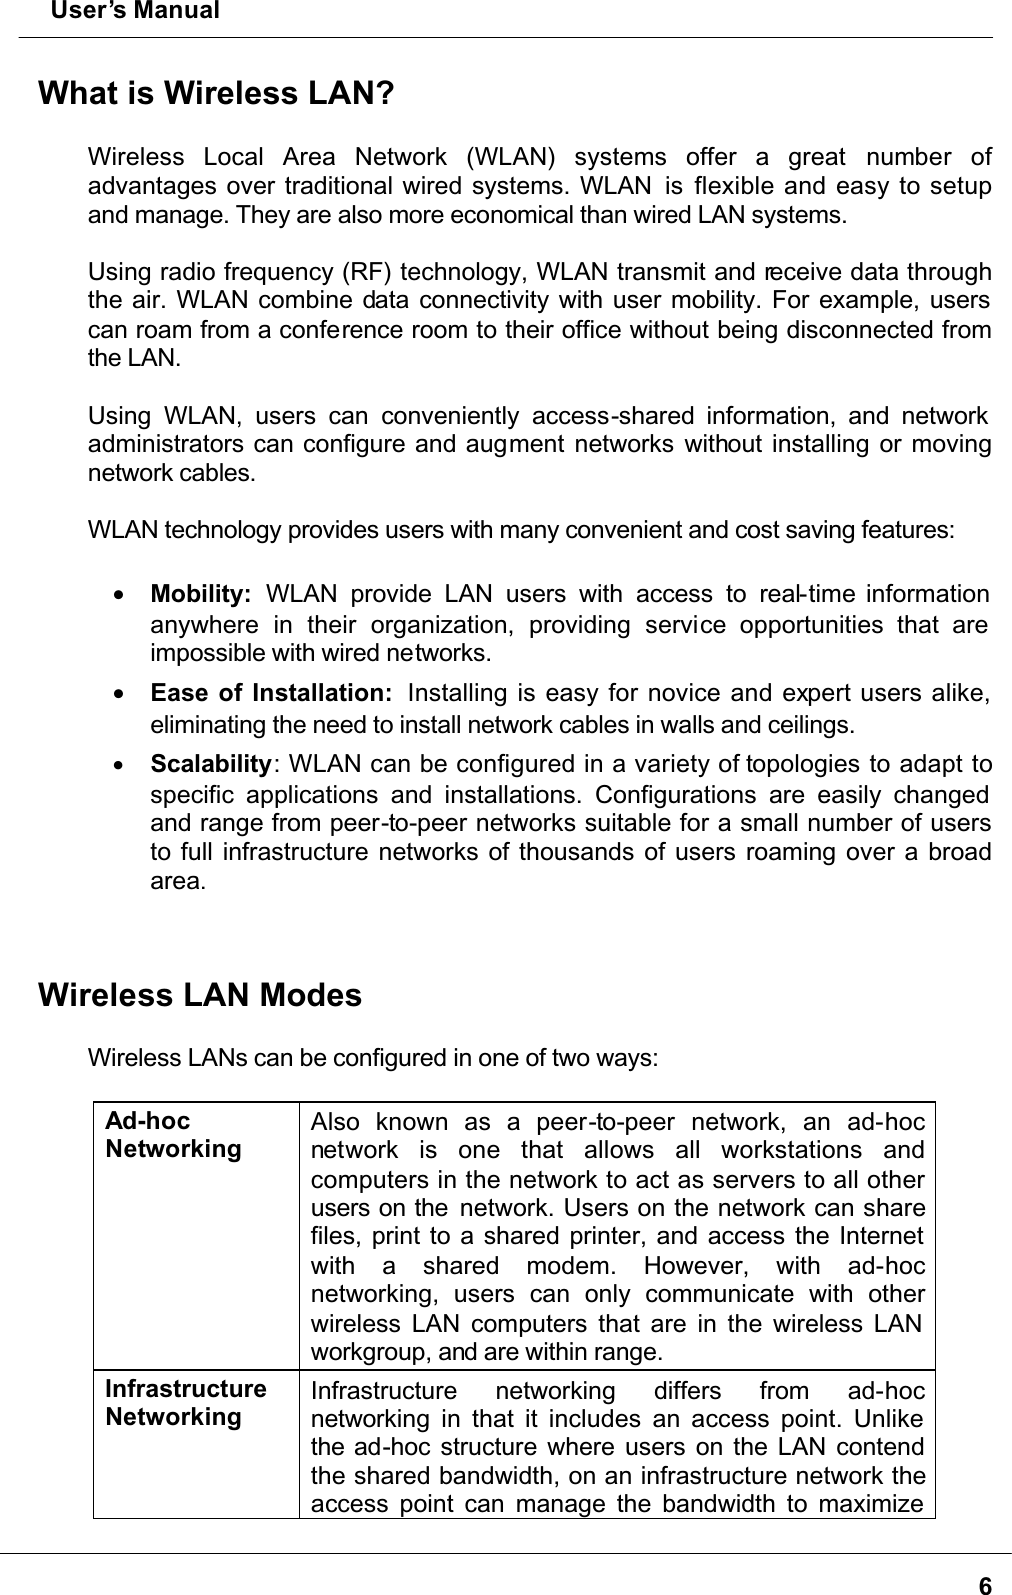  User’s Manual6What is Wireless LAN?Wireless Local Area Network (WLAN) systems offer a great number ofadvantages over traditional wired systems. WLAN  is flexible and easy to setup and manage. They are also more economical than wired LAN systems.Using radio frequency (RF) technology, WLAN transmit and receive data through the air. WLAN combine data connectivity with user mobility. For example, users can roam from a conference room to their office without being disconnected from the LAN.Using WLAN, users can conveniently access-shared information, and network administrators can configure and augment networks without installing or moving network cables.WLAN technology provides users with many convenient and cost saving features:•  Mobility: WLAN provide LAN users with access to real-time information anywhere in their organization, providing service opportunities that are impossible with wired networks.•  Ease of Installation:  Installing is easy for novice and expert users alike, eliminating the need to install network cables in walls and ceilings. •  Scalability: WLAN can be configured in a variety of topologies to adapt to specific applications and installations. Configurations are easily changed and range from peer-to-peer networks suitable for a small number of users to full infrastructure networks of thousands of users roaming over a broad area.Wireless LAN ModesWireless LANs can be configured in one of two ways:Ad-hocNetworkingAlso known as a peer-to-peer network, an ad-hocnetwork is one that allows all workstations andcomputers in the network to act as servers to all other users on the  network. Users on the network can share files, print to a shared printer, and access the Internet with a shared modem. However, with ad-hocnetworking, users can only communicate with otherwireless LAN computers that are in the wireless LAN workgroup, and are within range.InfrastructureNetworkingInfrastructure networking differs from ad-hocnetworking in that it includes an access point. Unlike the ad-hoc structure where users on the LAN contend the shared bandwidth, on an infrastructure network the access point can manage the bandwidth to maximize 